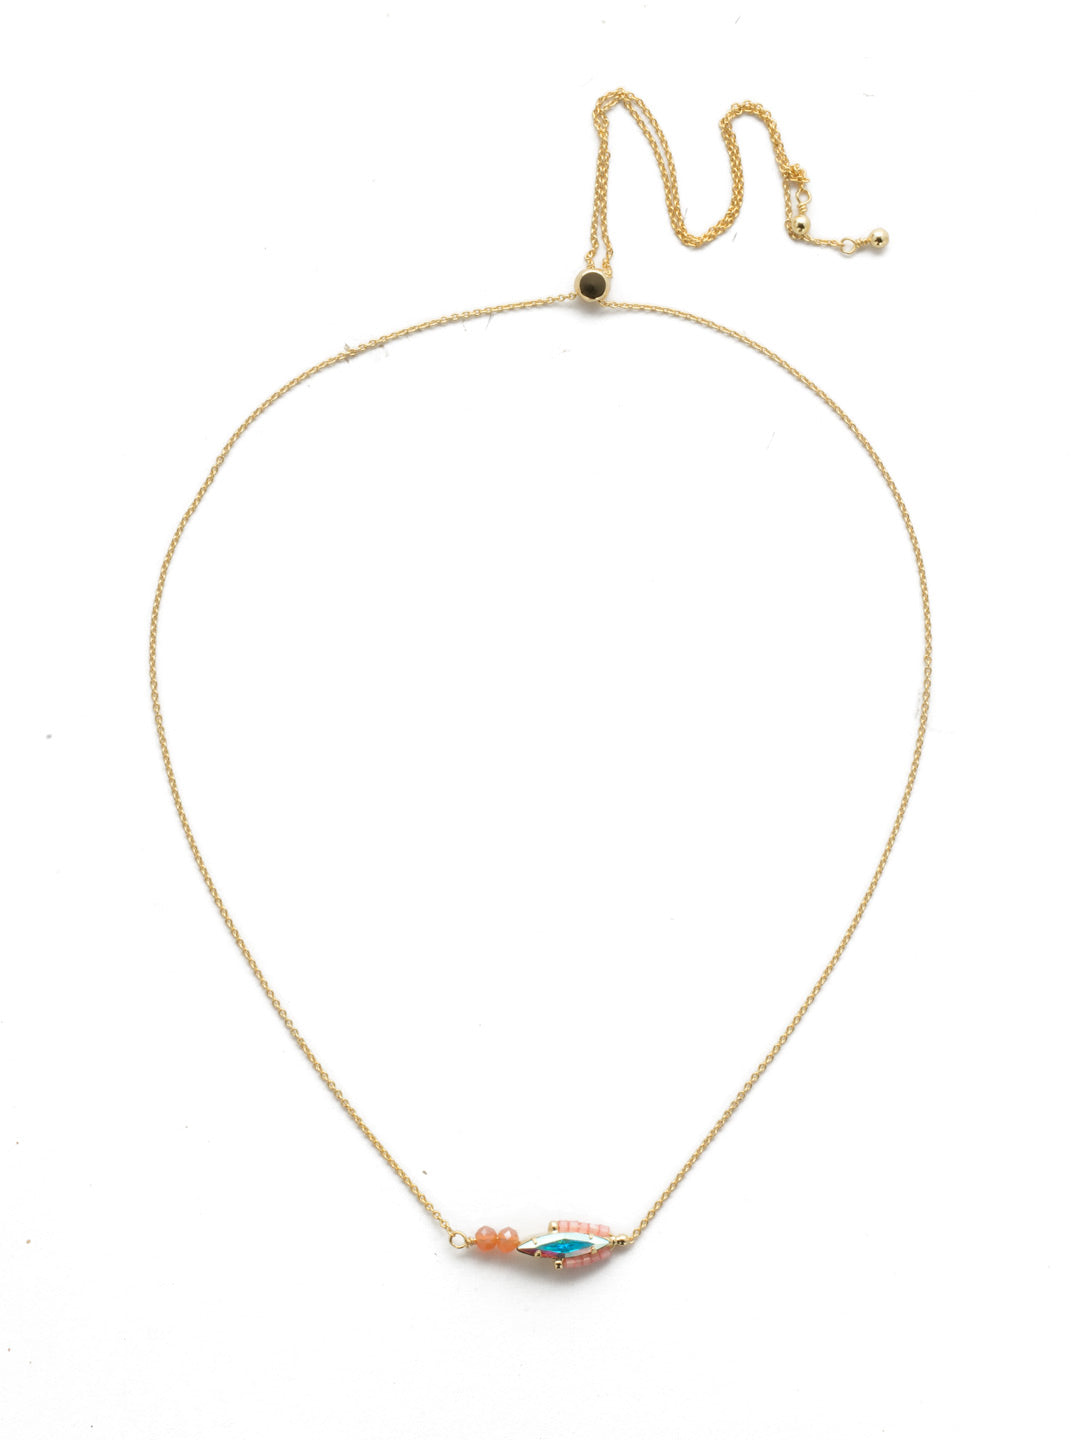 Phyllida Pendant Necklace - NEK4BGISS - <p>Give your outfit an edge with this navette crystal statement pendant necklace with some beadwork thrown in for flirty fun. From Sorrelli's Island Sun collection in our Bright Gold-tone finish.</p>